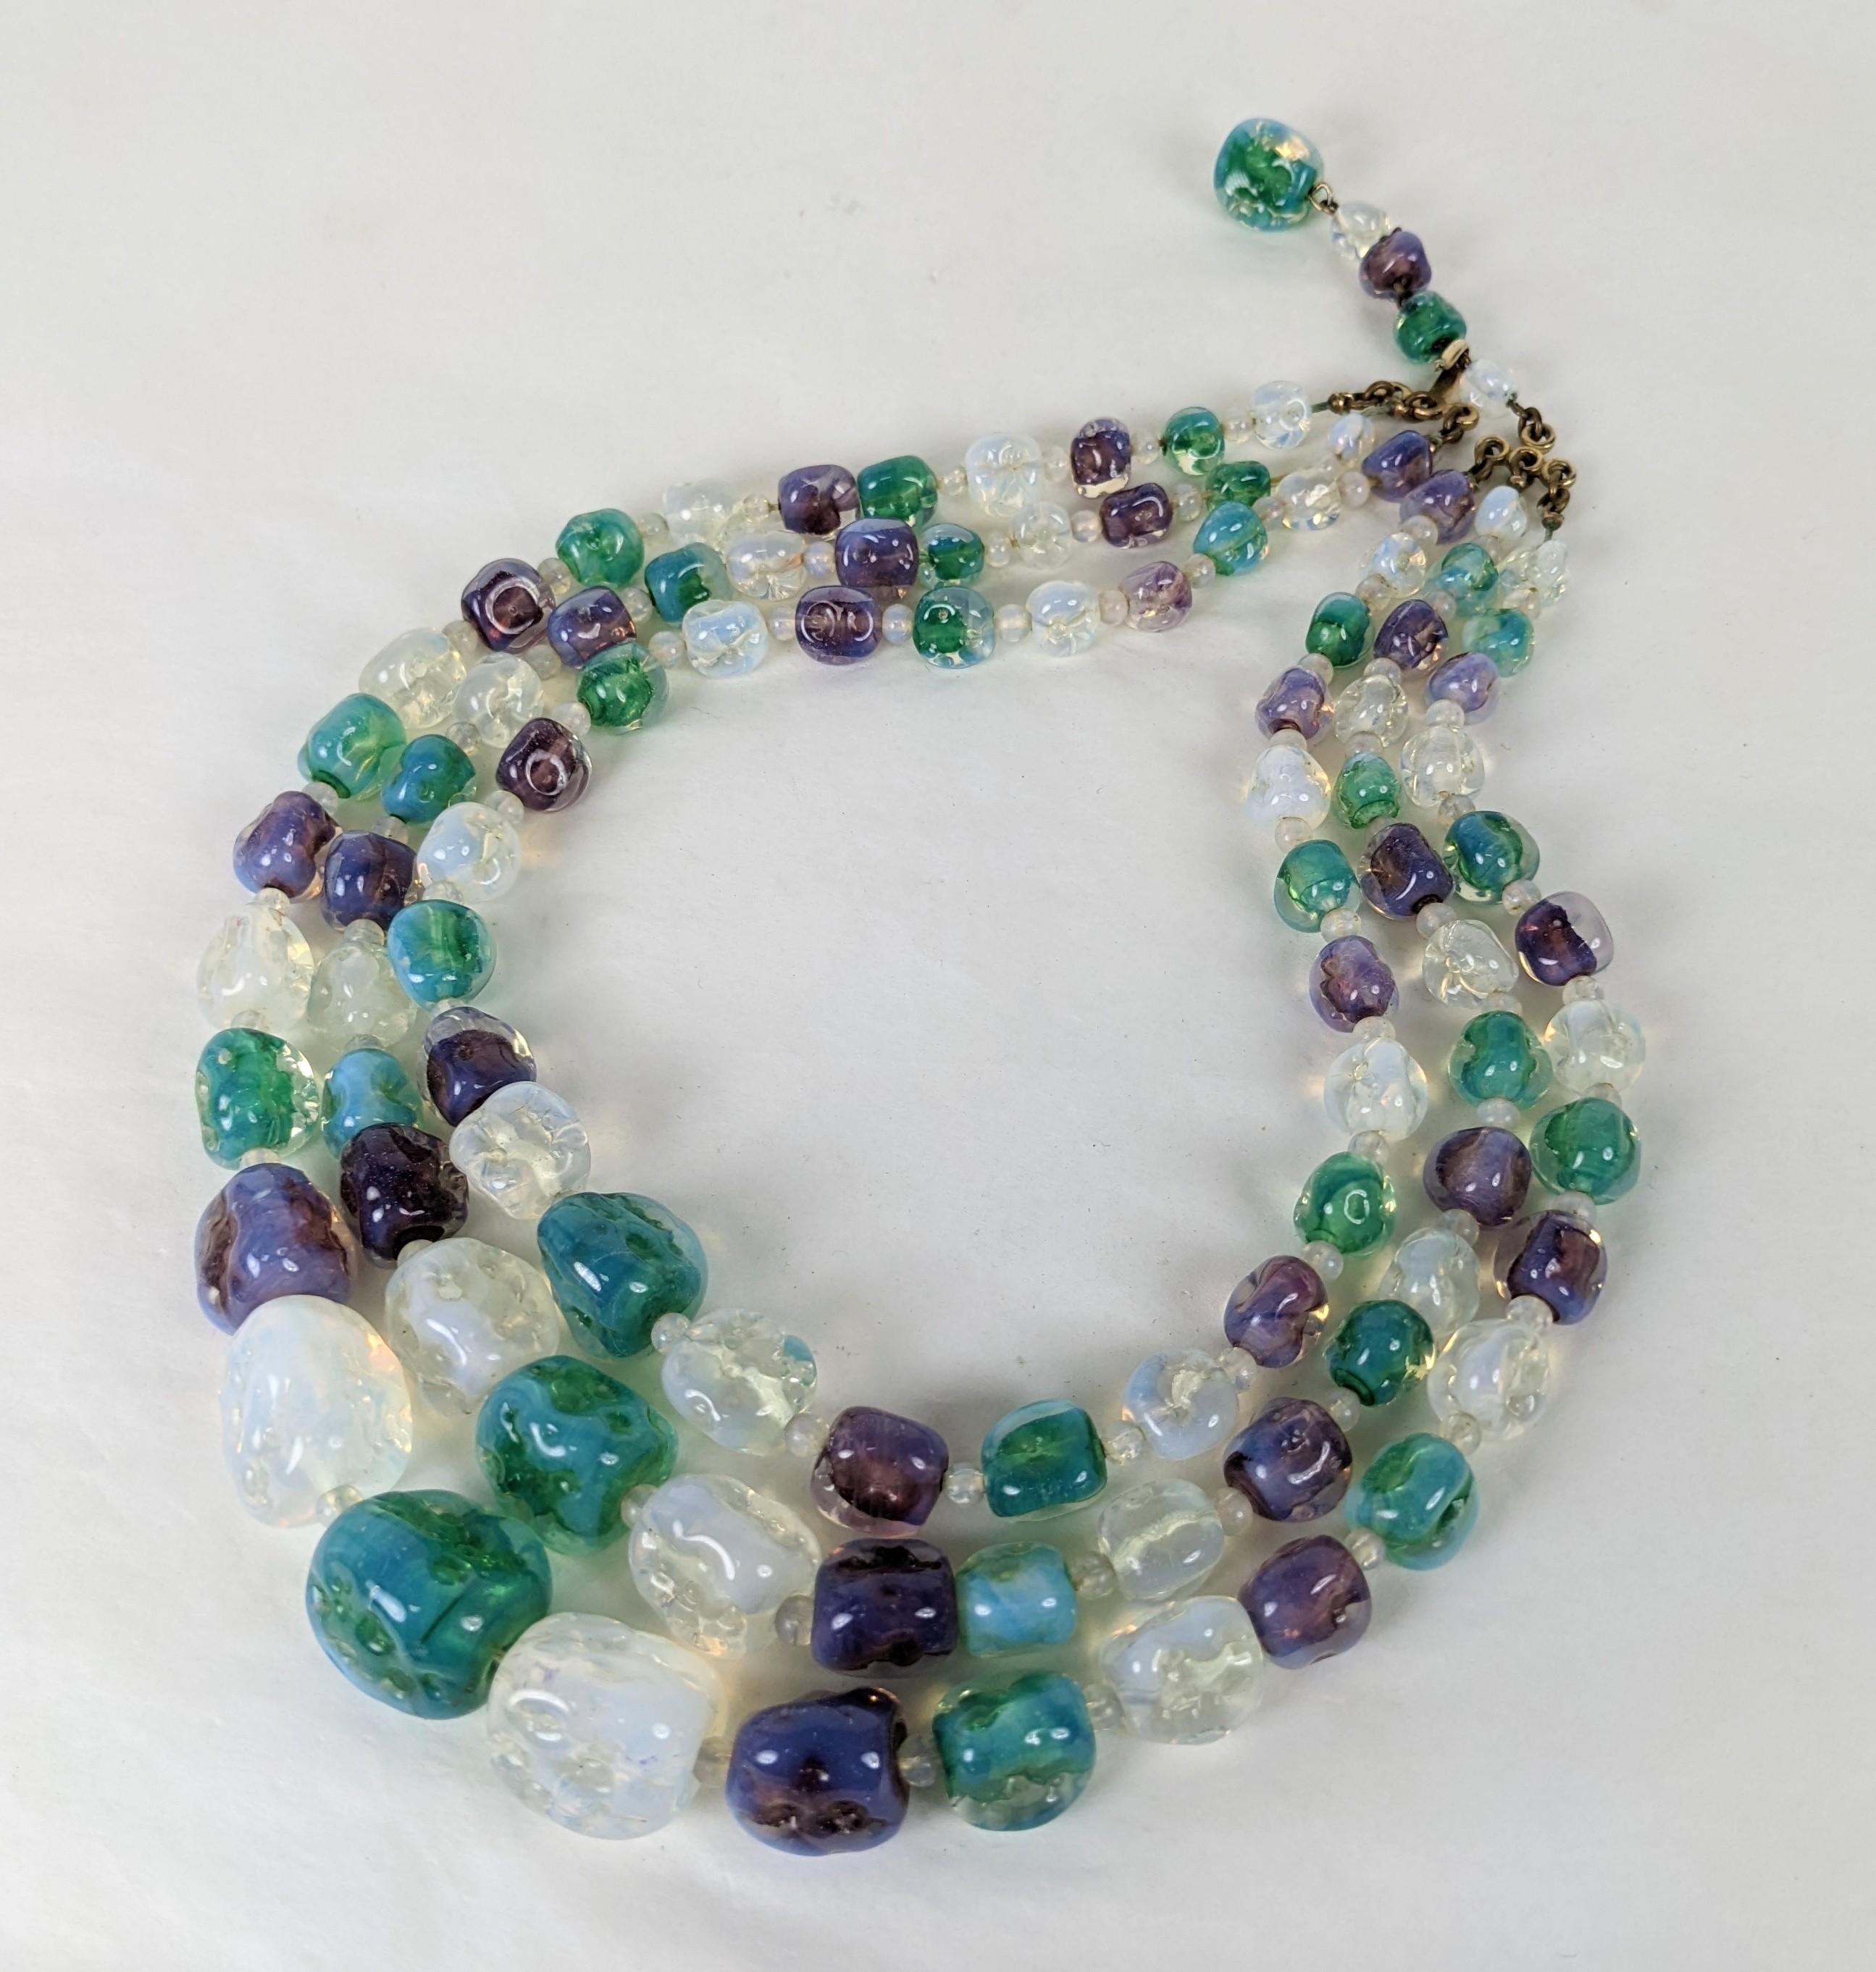 Striking Maison Gripoix Hand Made Pate de Verre Beads from the 1950's. Opaline glass is used for beads in opal, amythest and emerald all with opaline cast and a martele hammered finish. Each graduated bead is hand made and is spaced with smaller